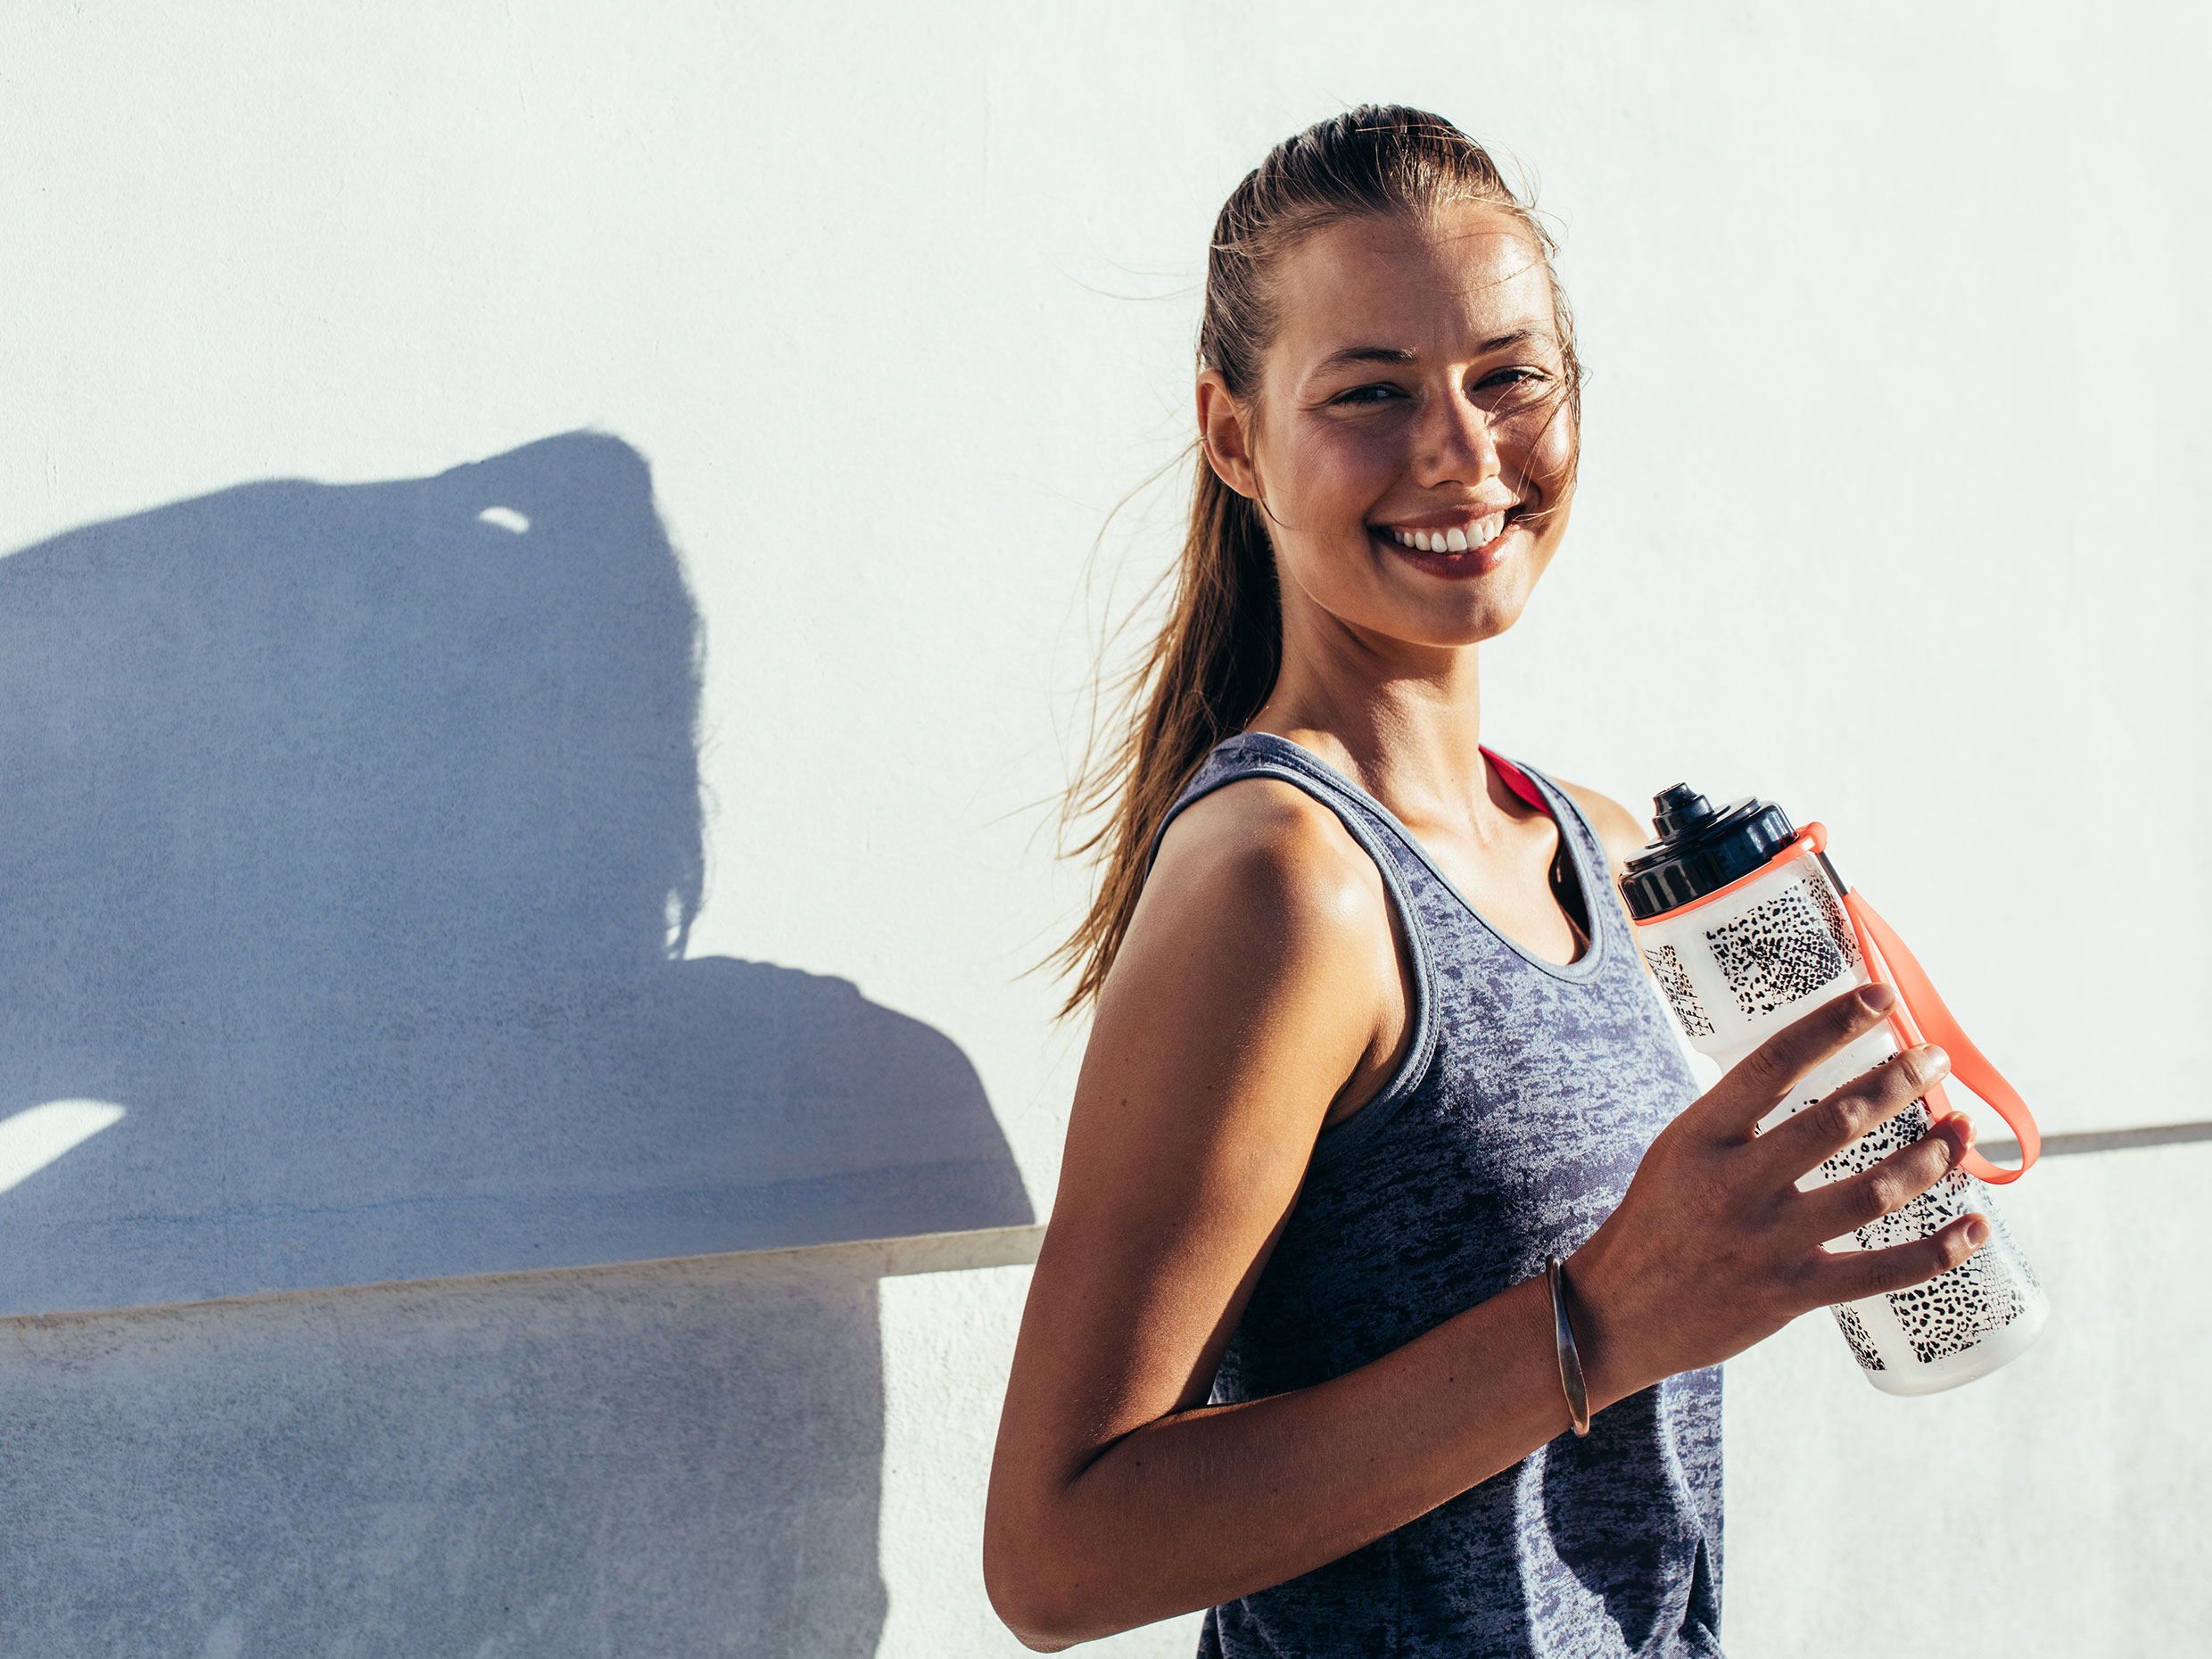 woman smiling while wearing an exercise shirt and holding a water bottle